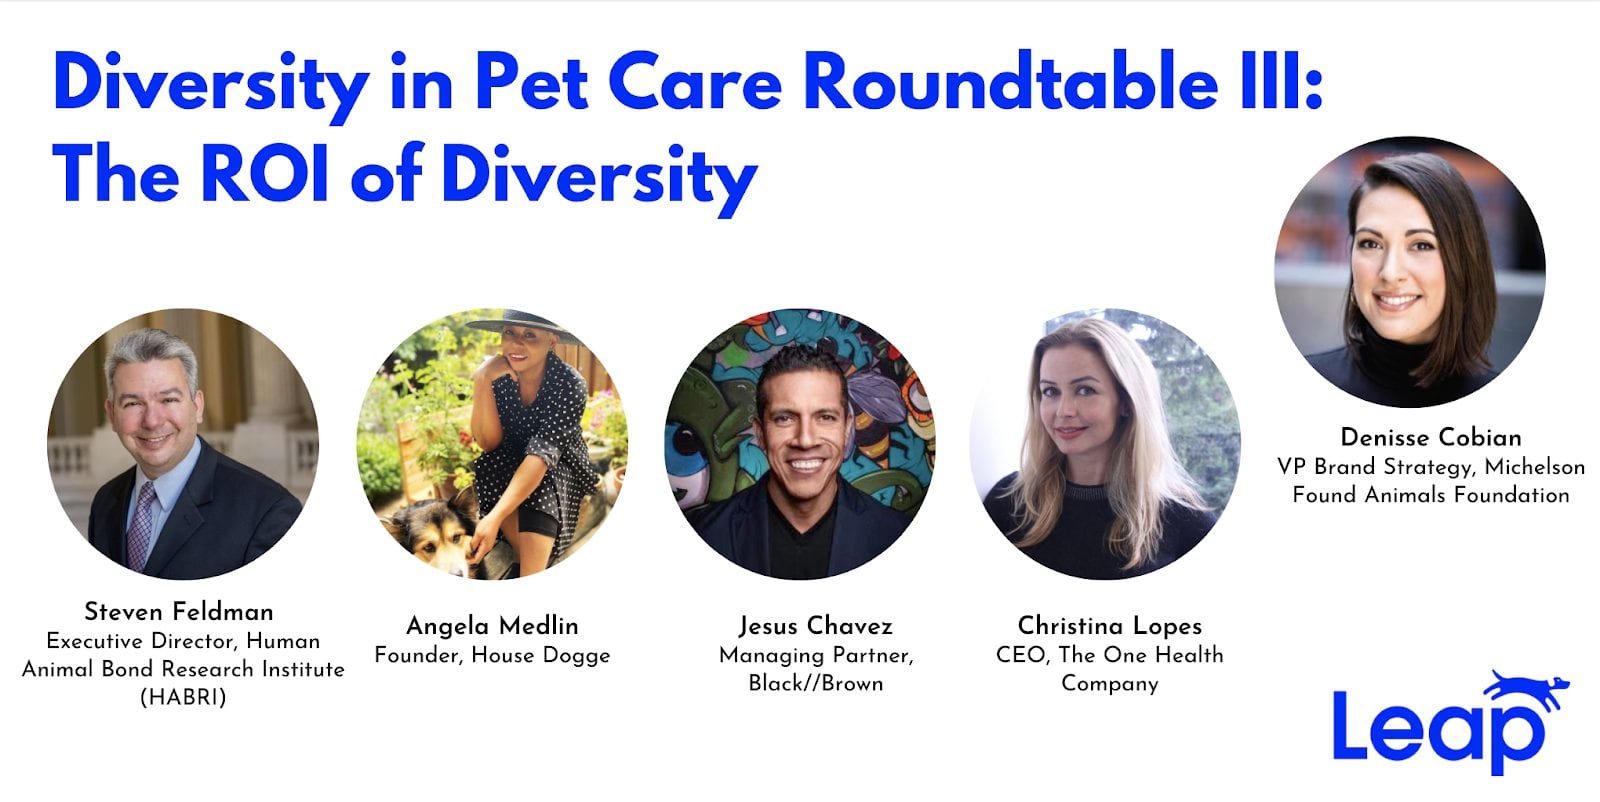 The ROI of Diversity in Pet Care